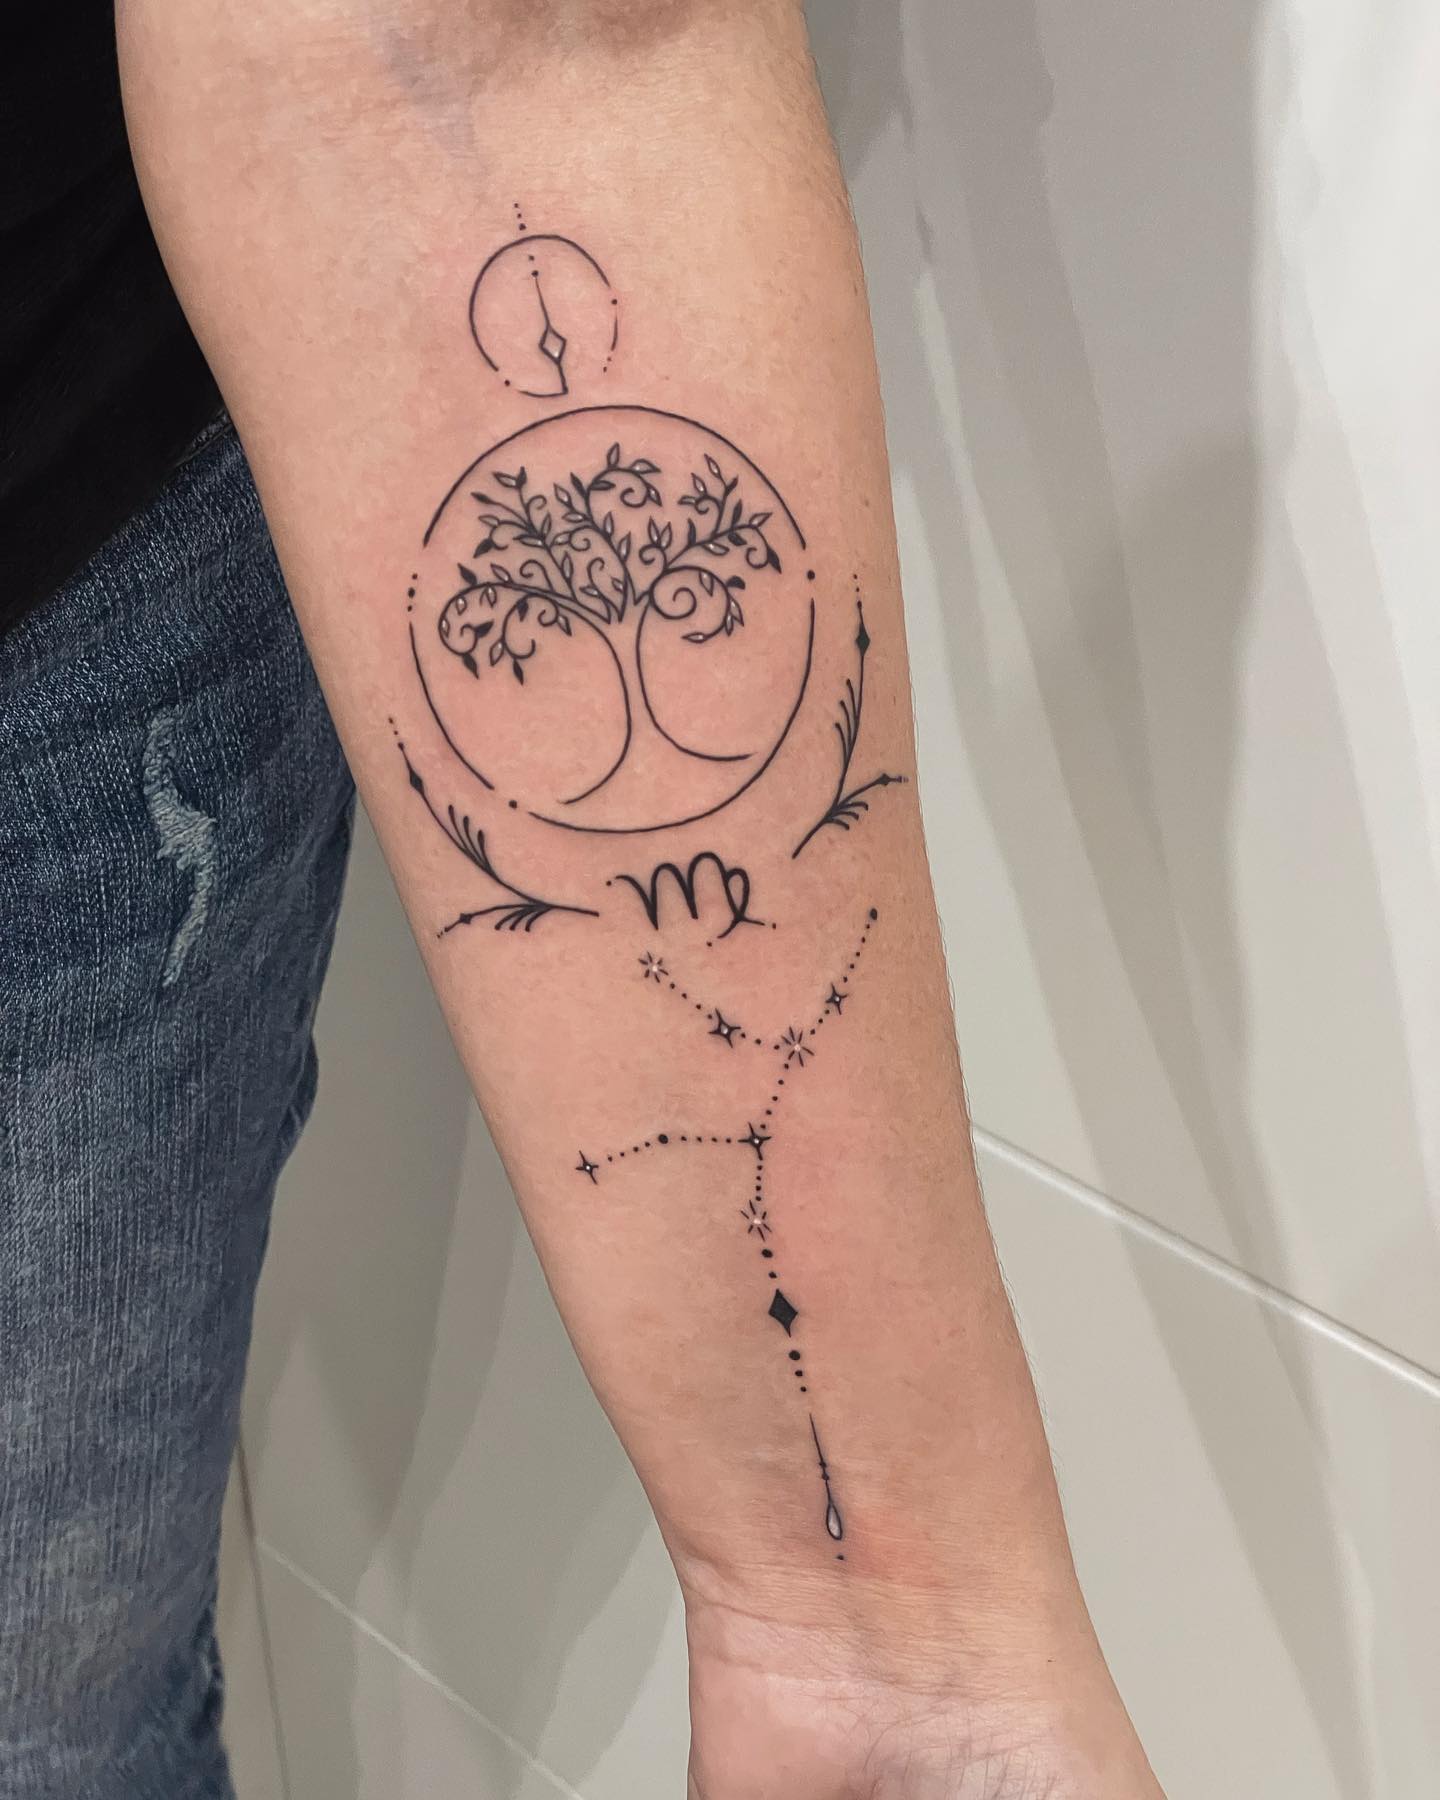 Just a plain Virgo sign tattoo may not be enough for you to get. If you think so, why don't you have your star sign and a tree of life as a decoration?